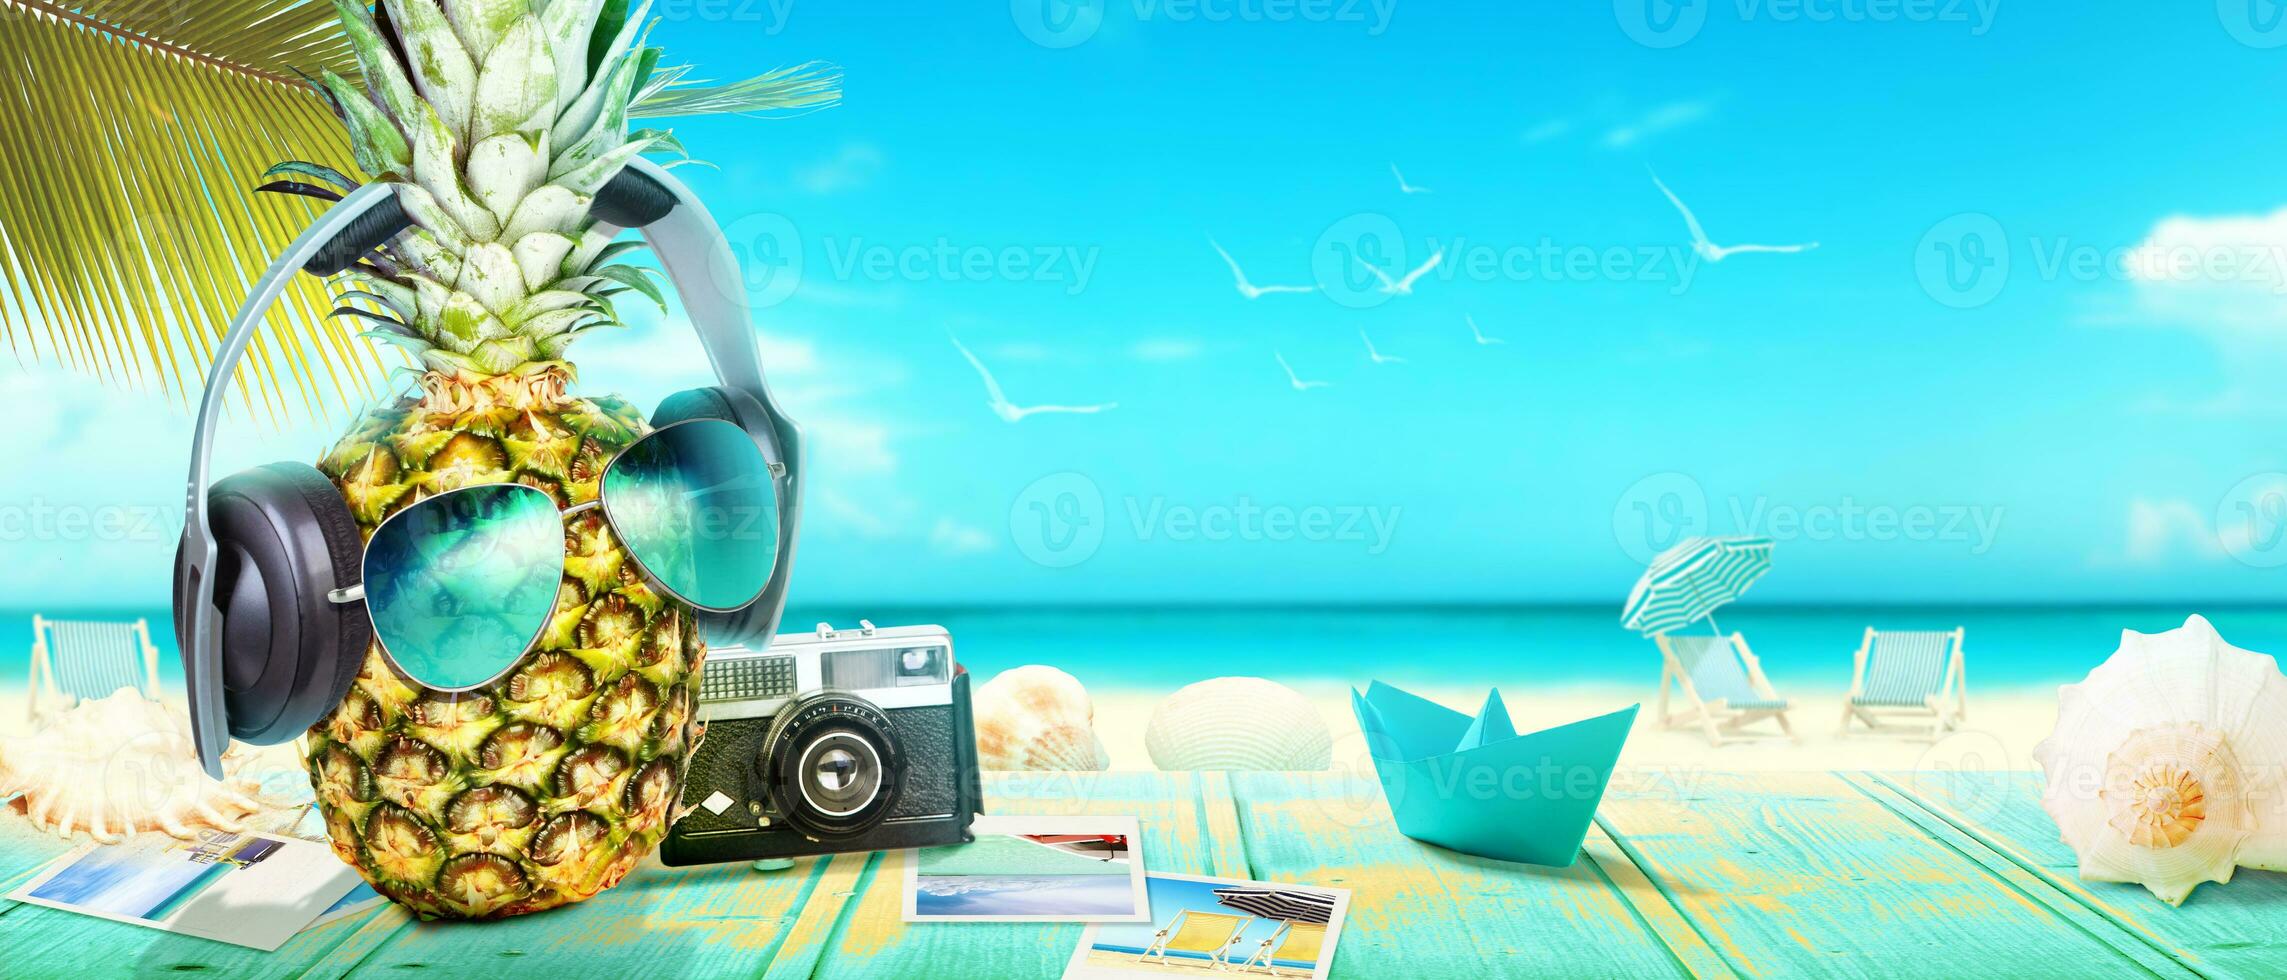 Creative pineapple with sunglasses on summer background. photo